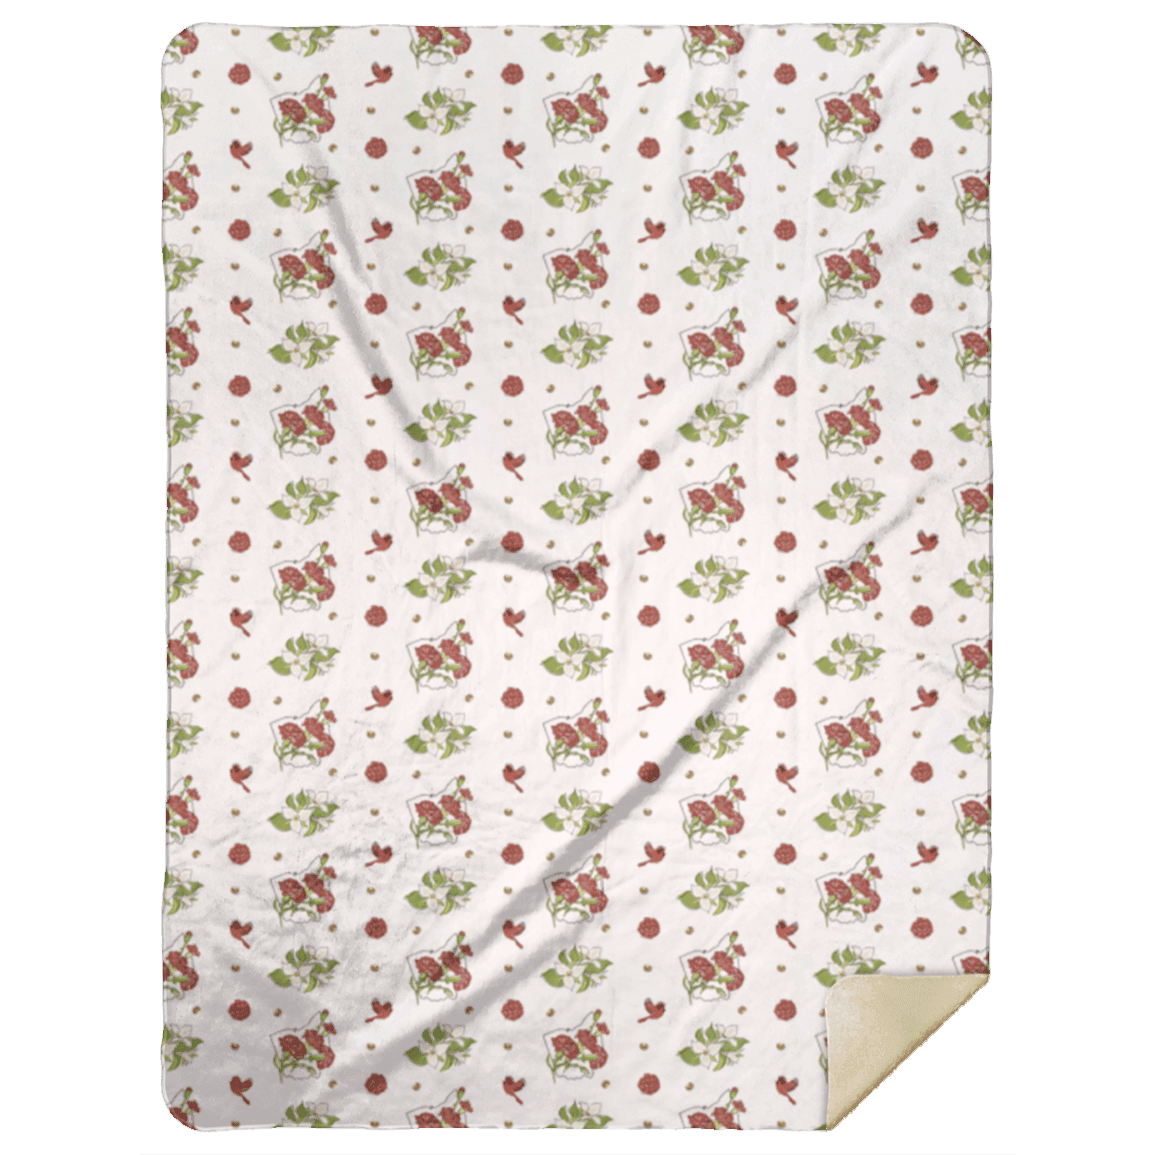 Ohio-themed floral plush throw blanket with vibrant red, yellow, and blue flowers on a soft, white background.